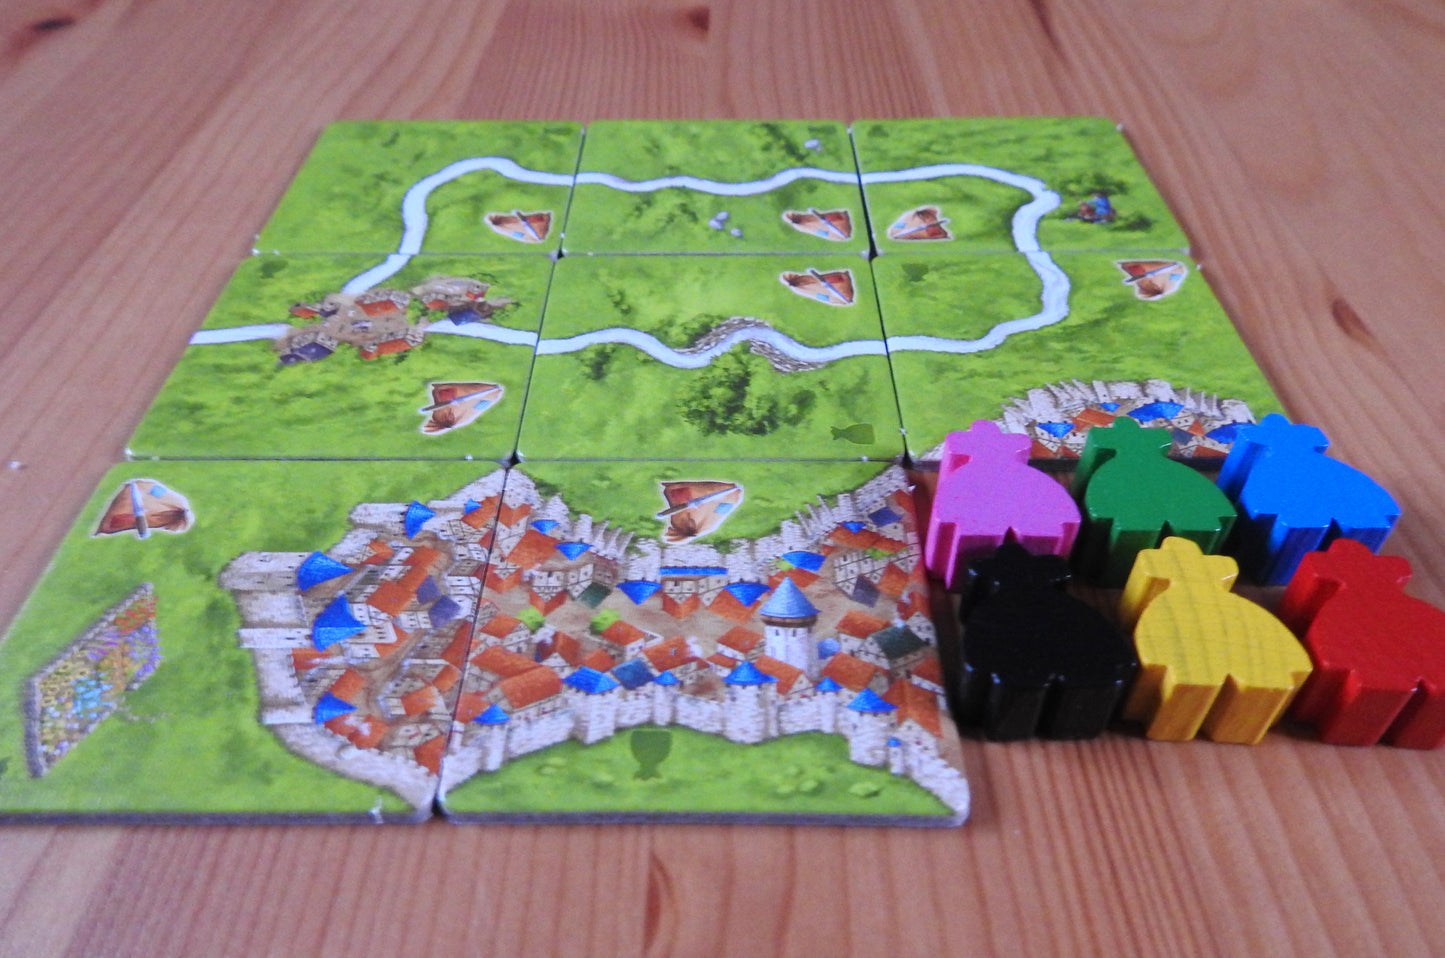 Another view showing all 6 wooden meeple figures next to the tiles in this Carcassonne Robbers expansion.